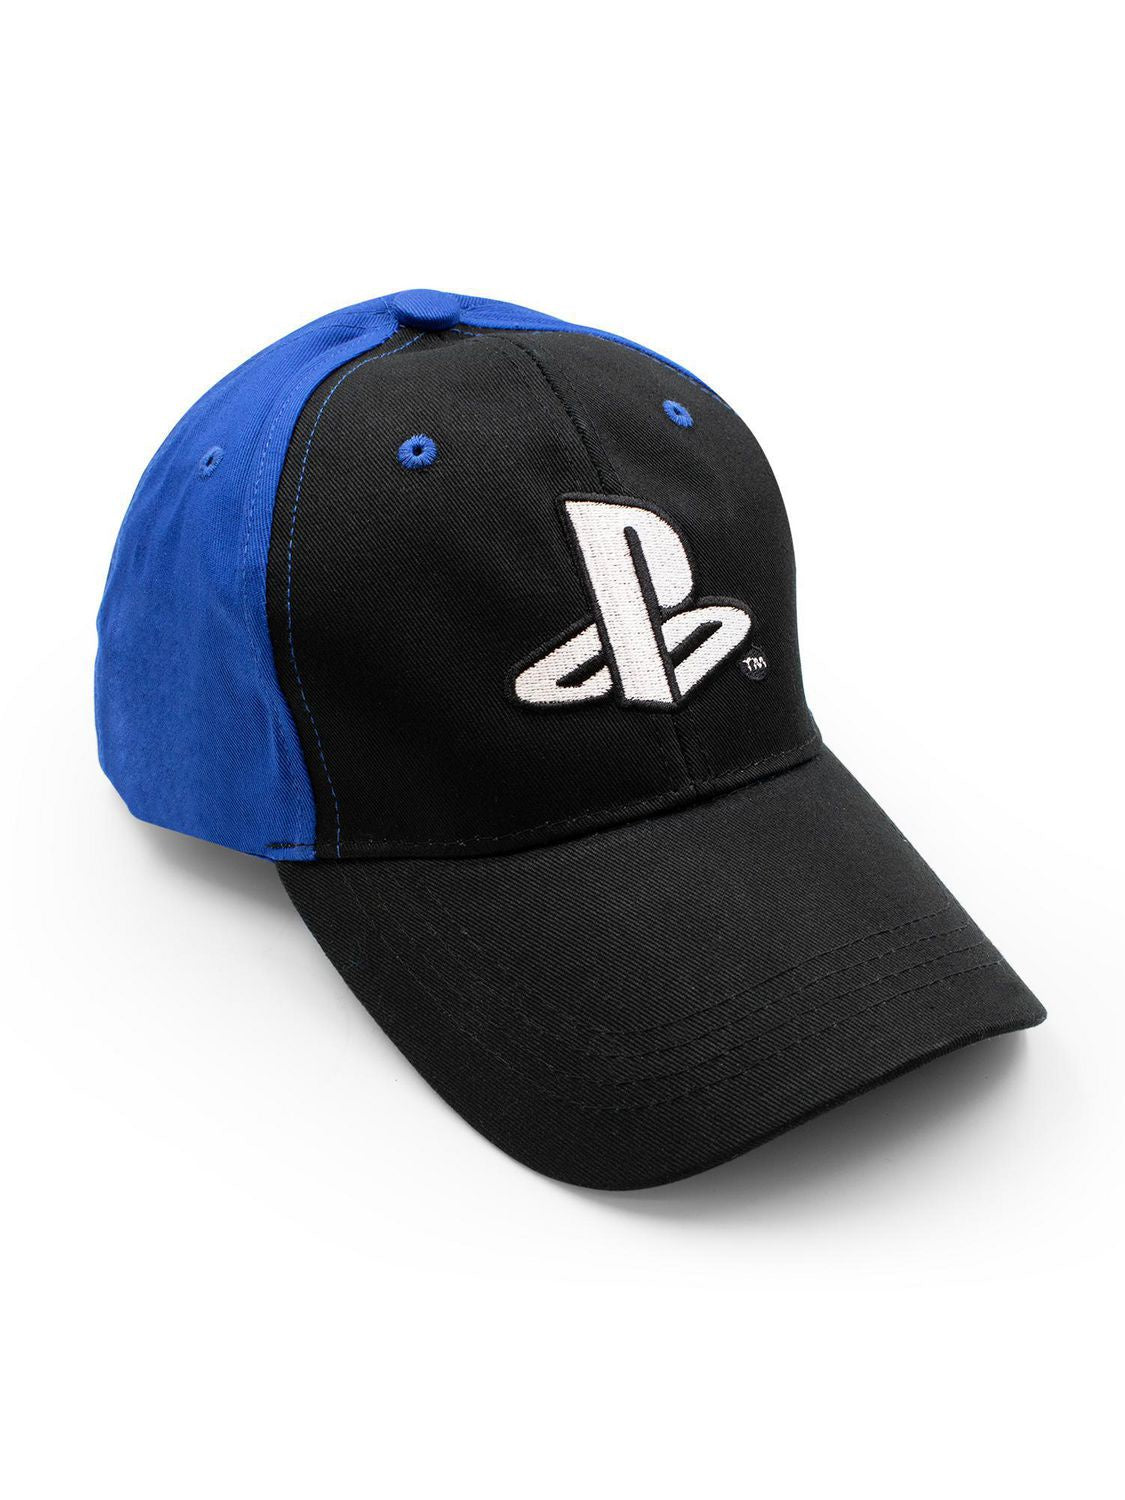 Sony Playstation 1 Logo Blue and Black Hat PS1